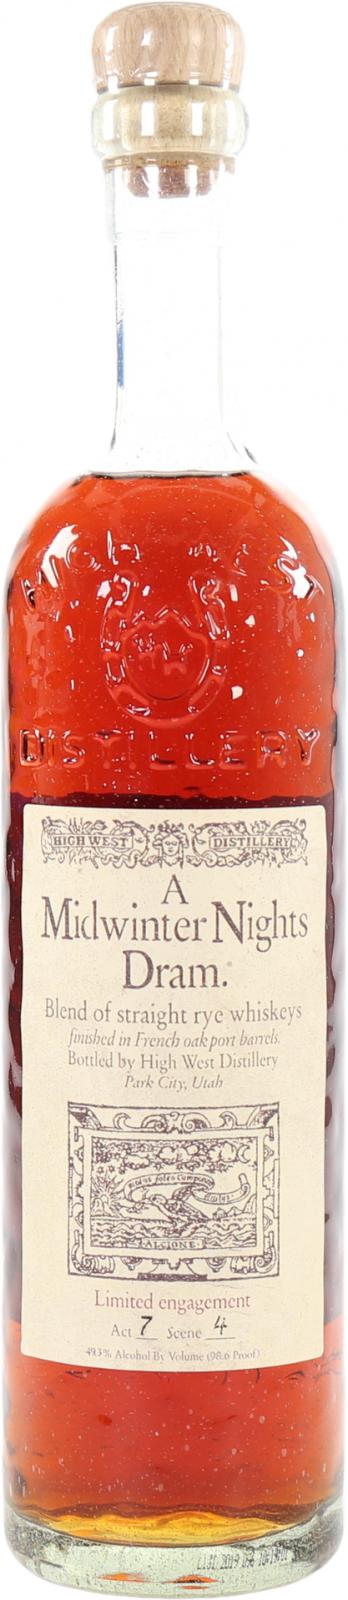 High West A Midwinter Nights Dram Act 7 Scene 4 49.3% 750ml